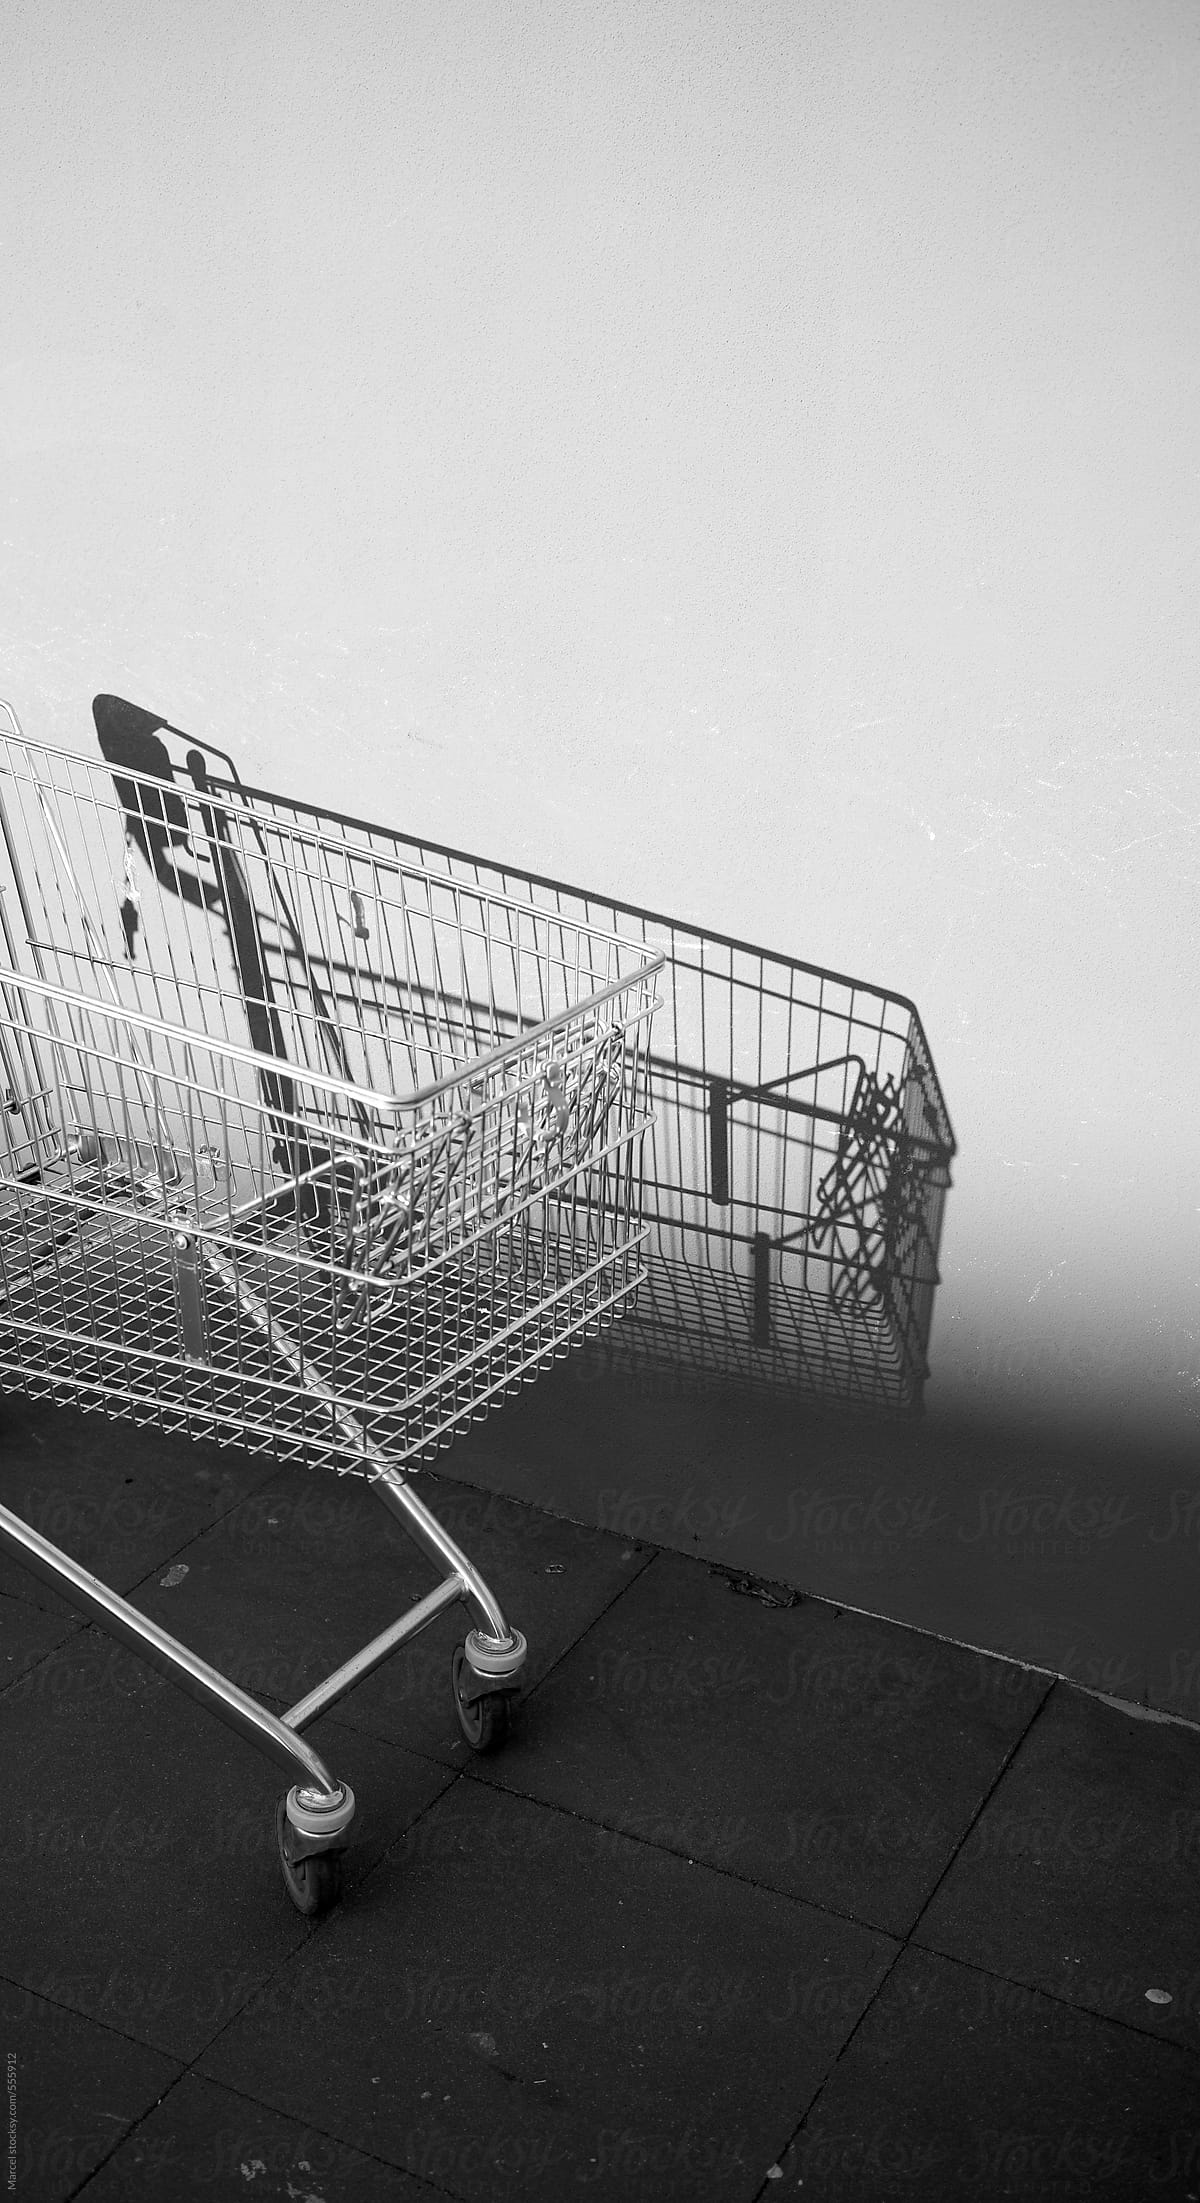 Empty shopping cart and its shadow